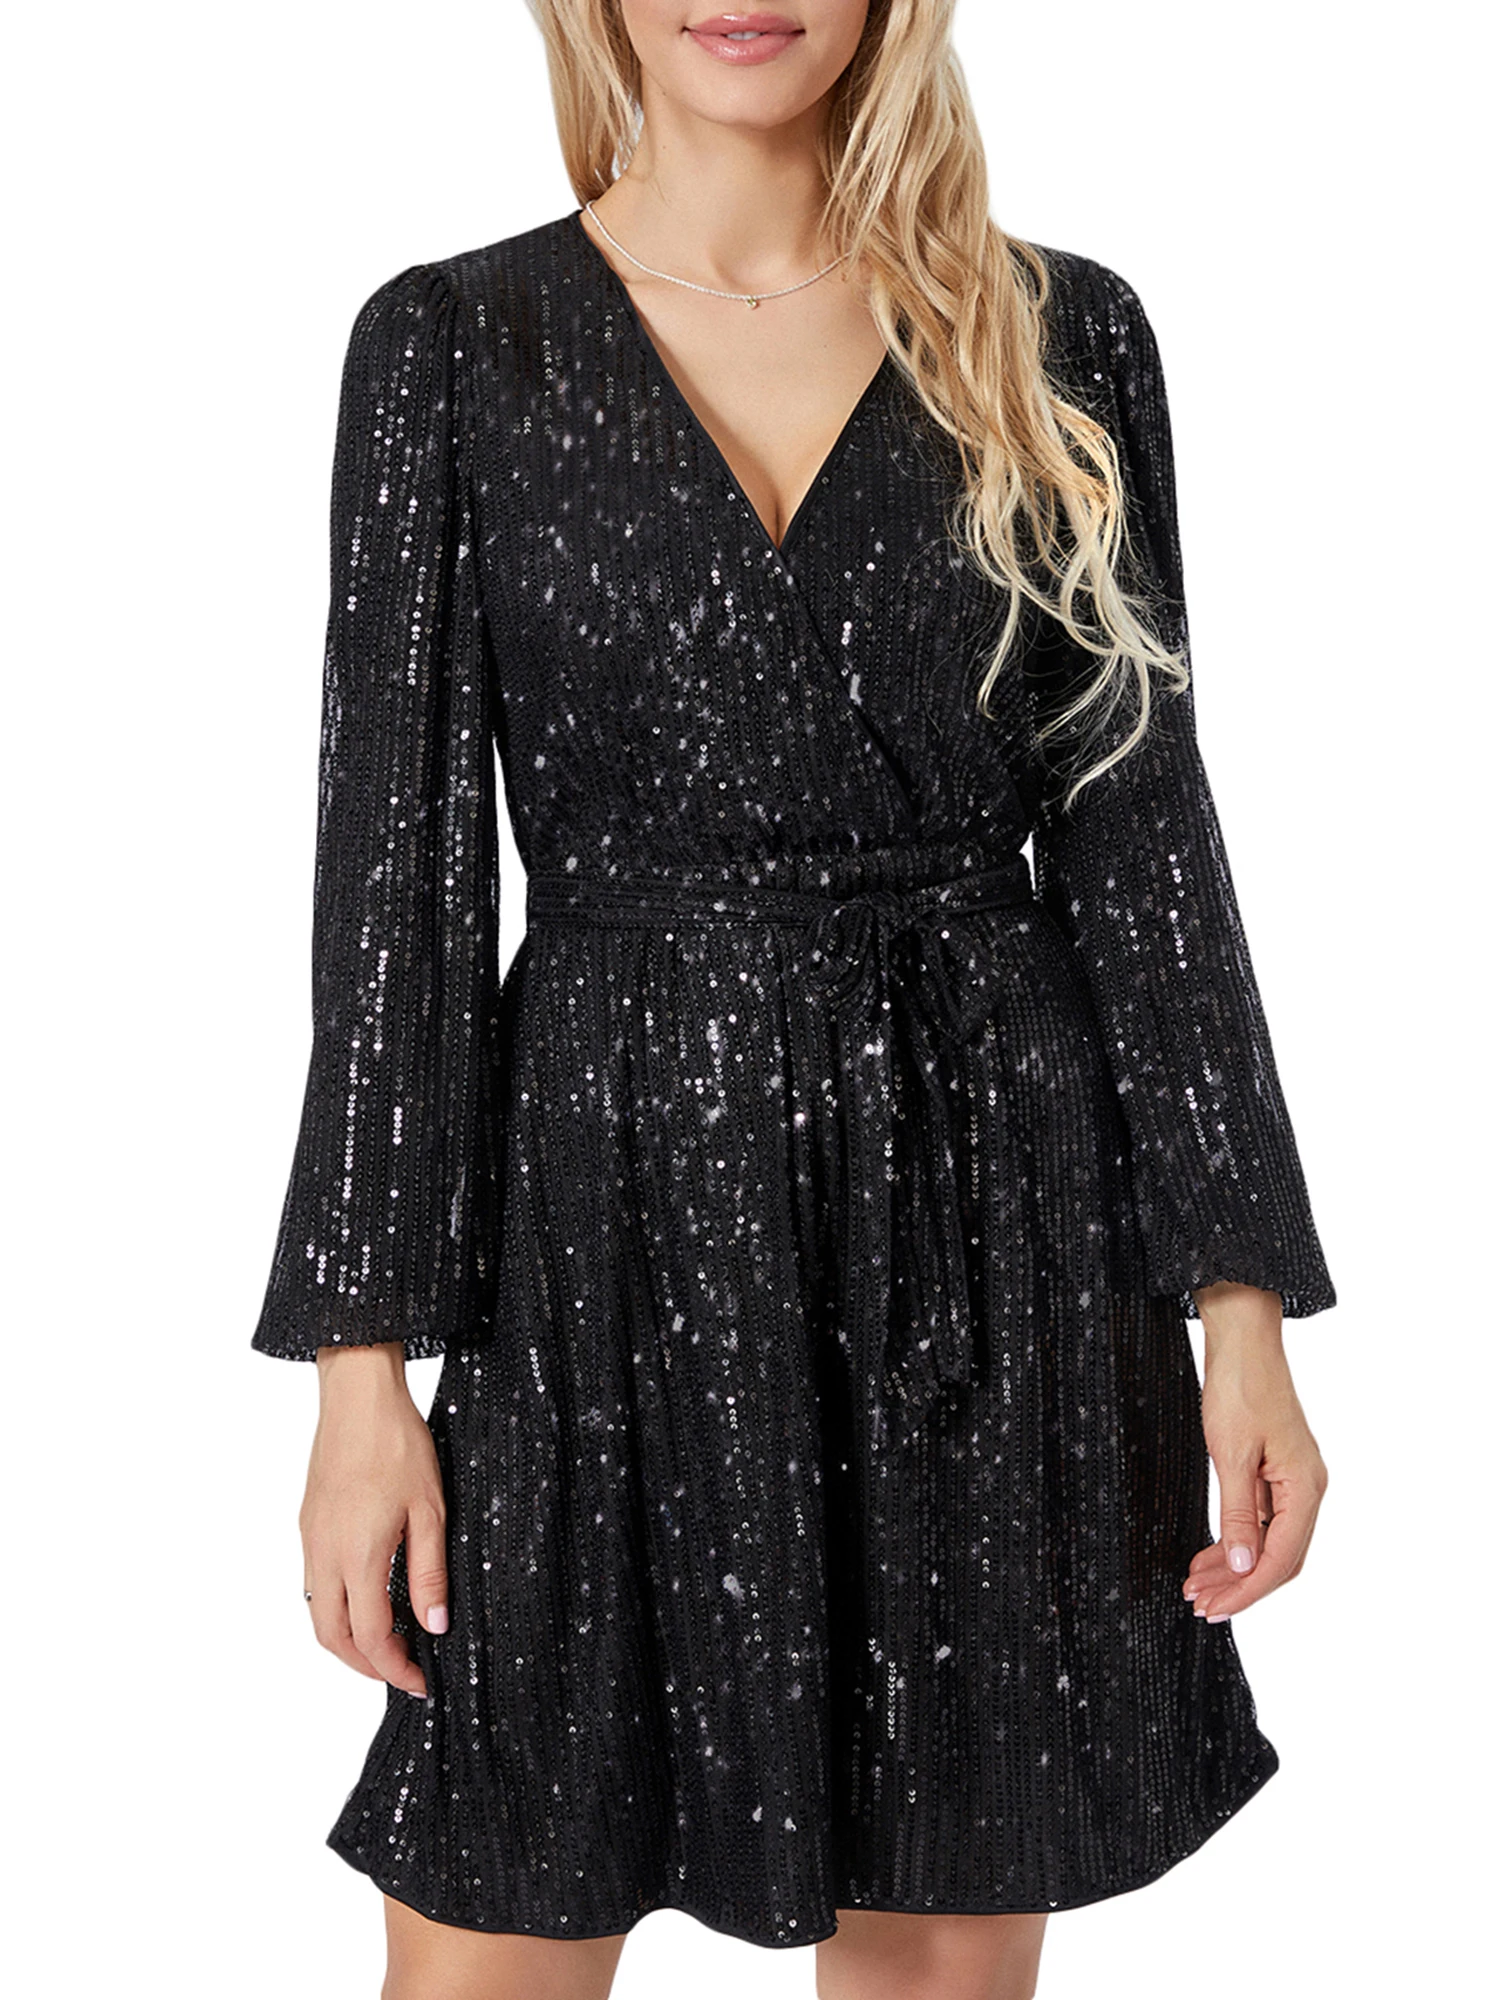 

Women s Sparkly Sequin Mini Dress Long Sleeve V Neck Wrap Belted Party A-Line Cocktail Dress